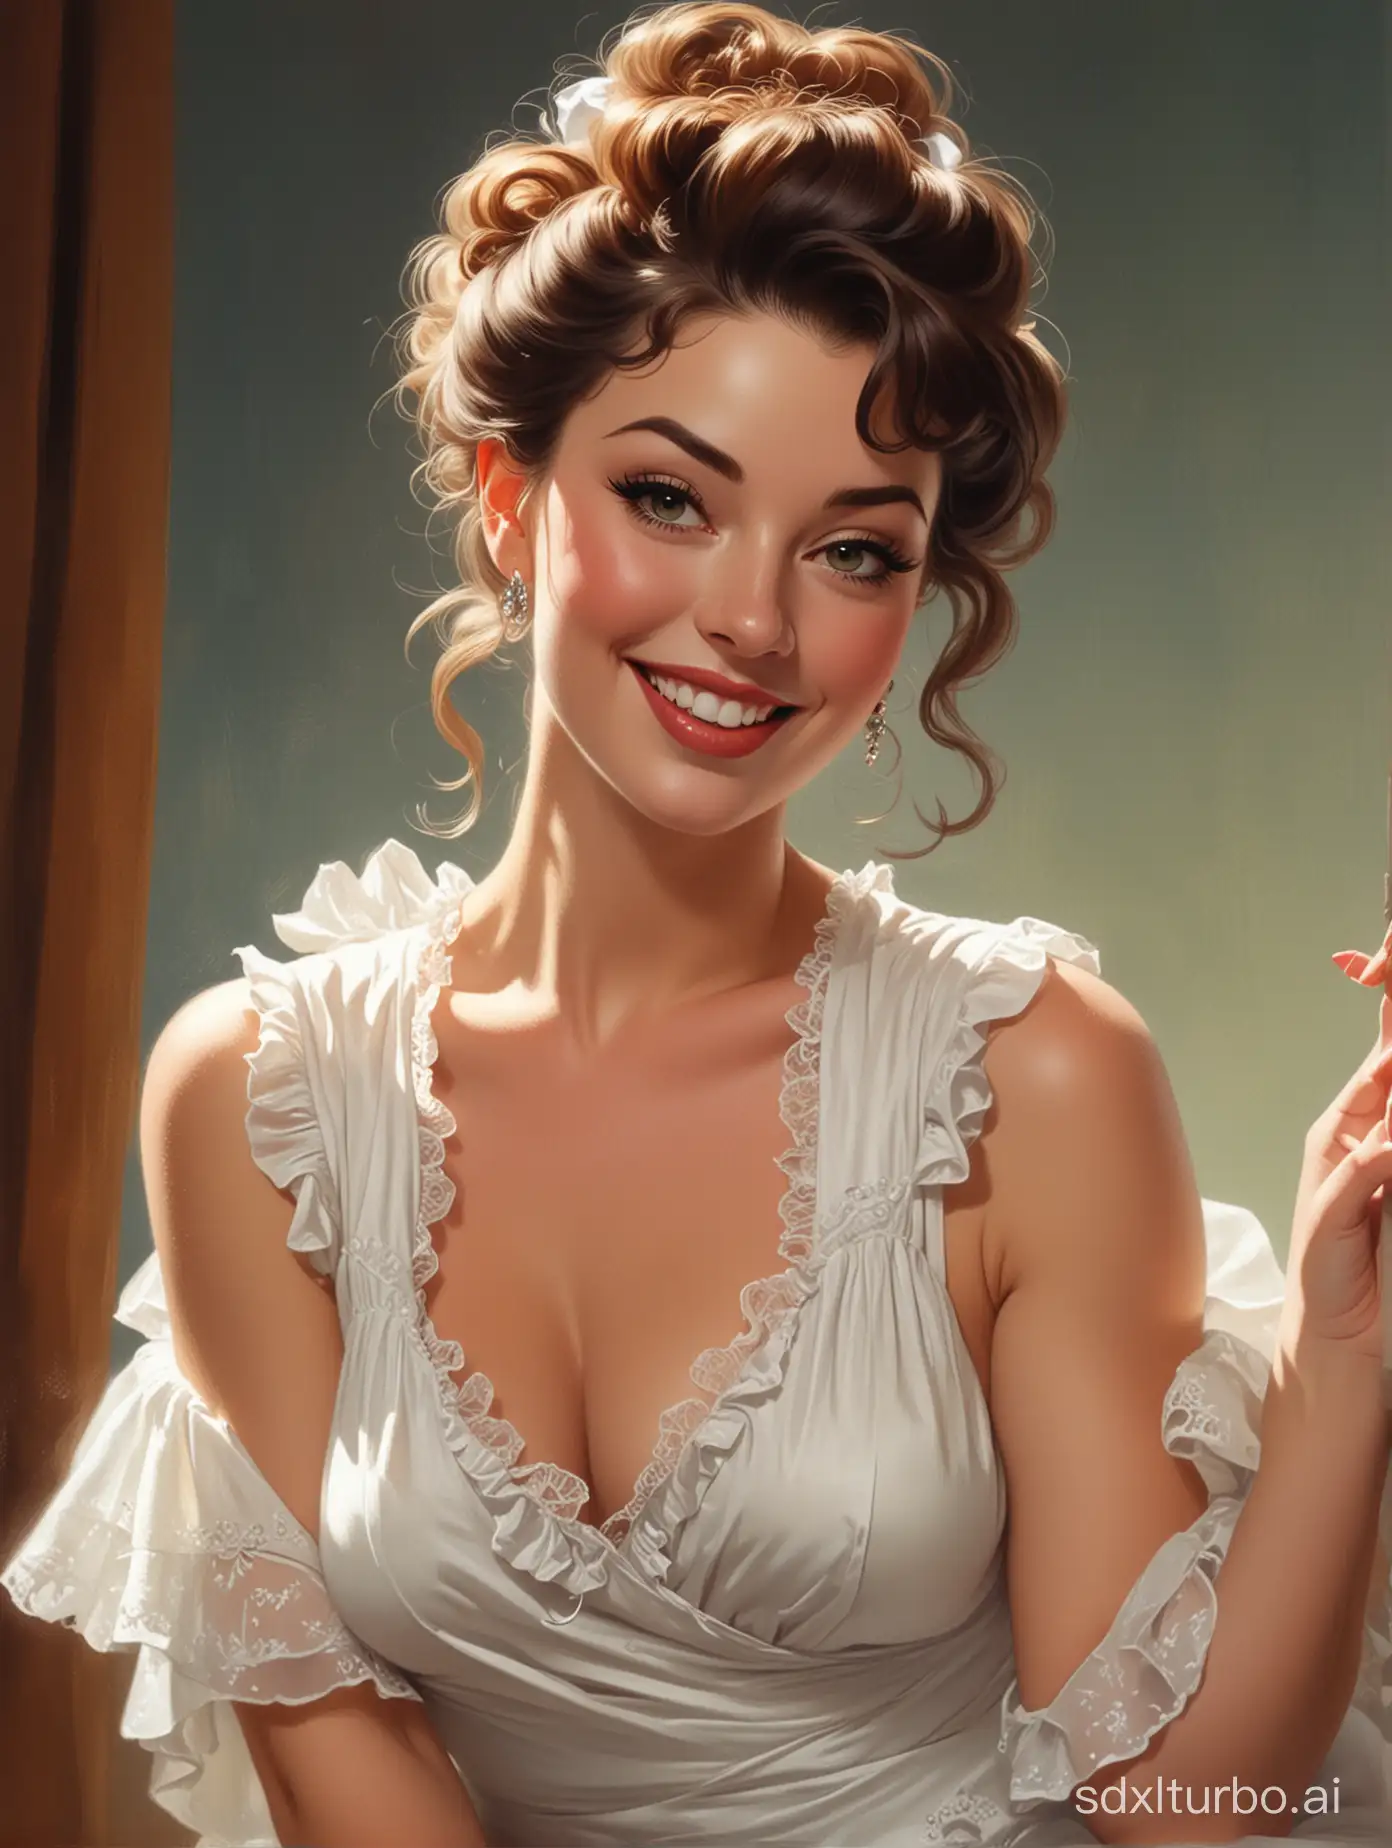 Playful-Woman-in-White-Dress-High-Detail-Burlesque-Nightgown-Ad-Image